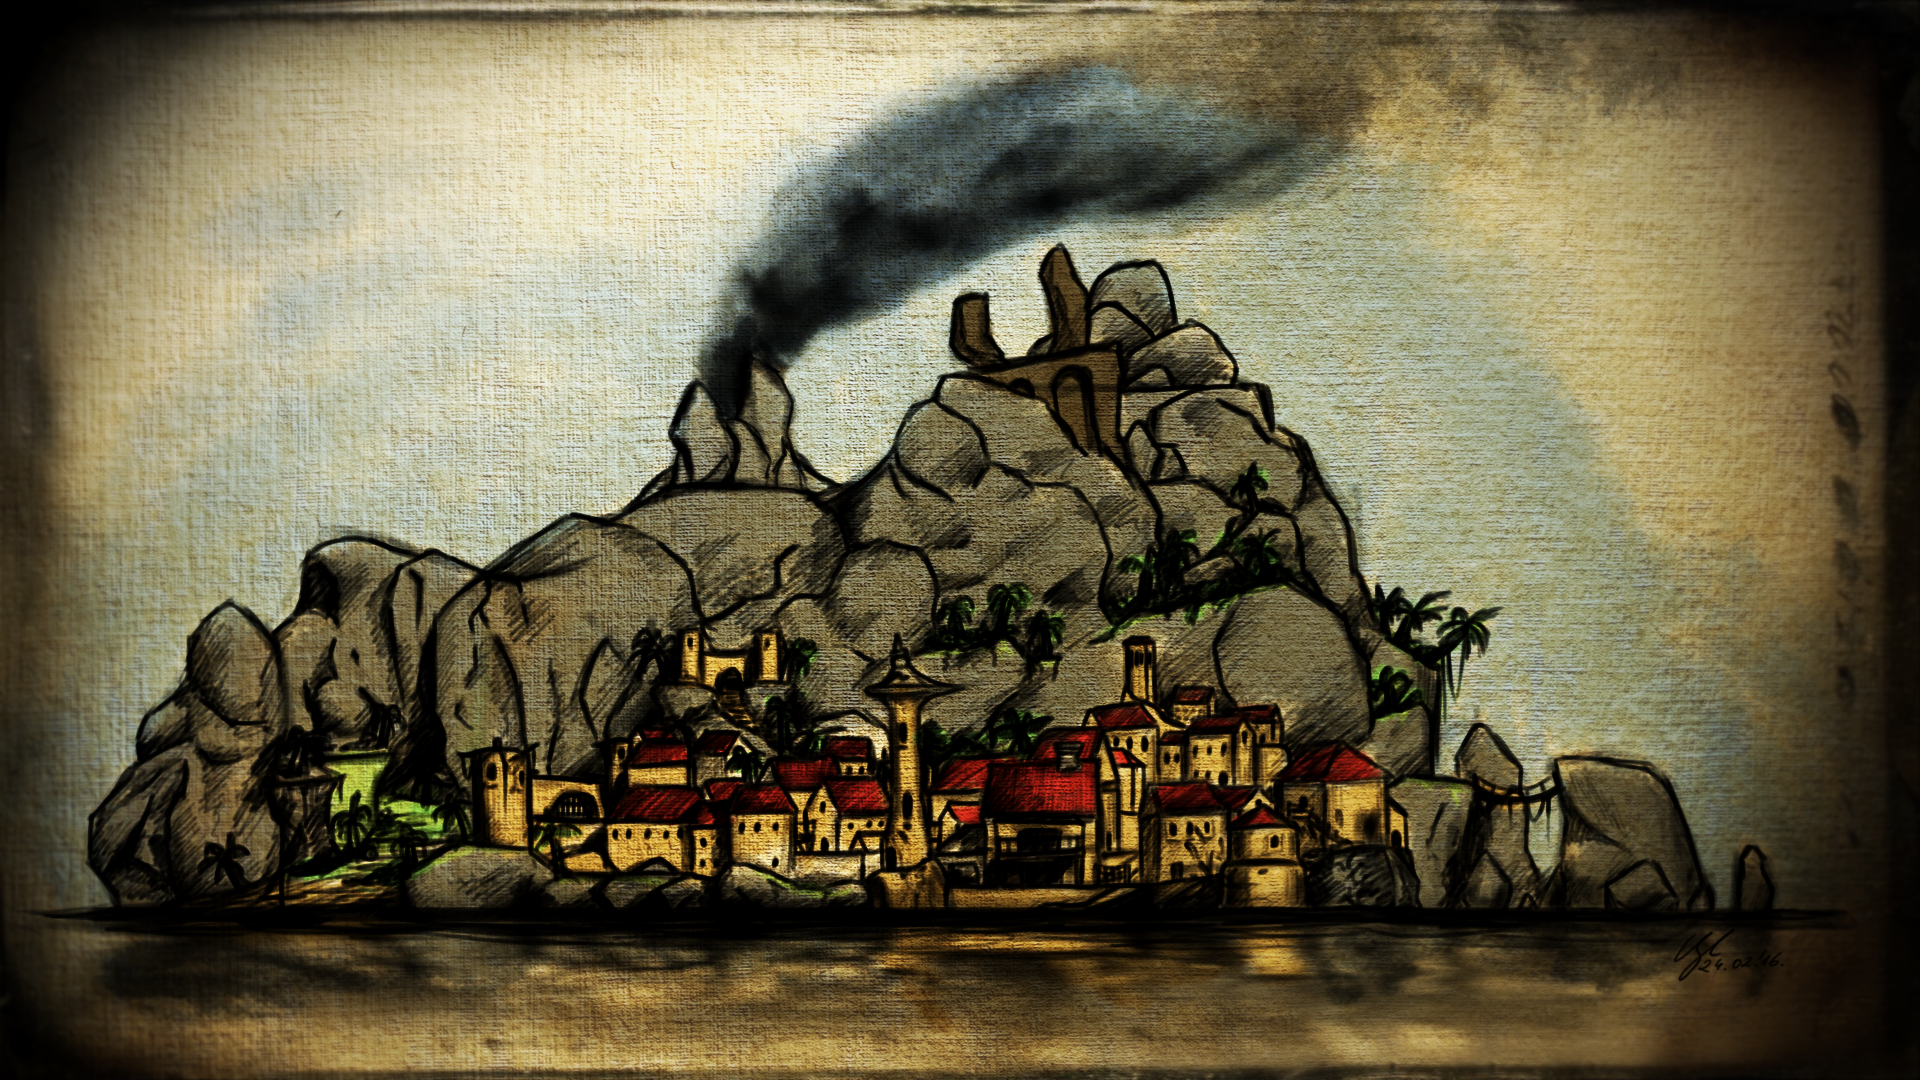 the_harbor_city_by_therockydoo-d9sylb1.png